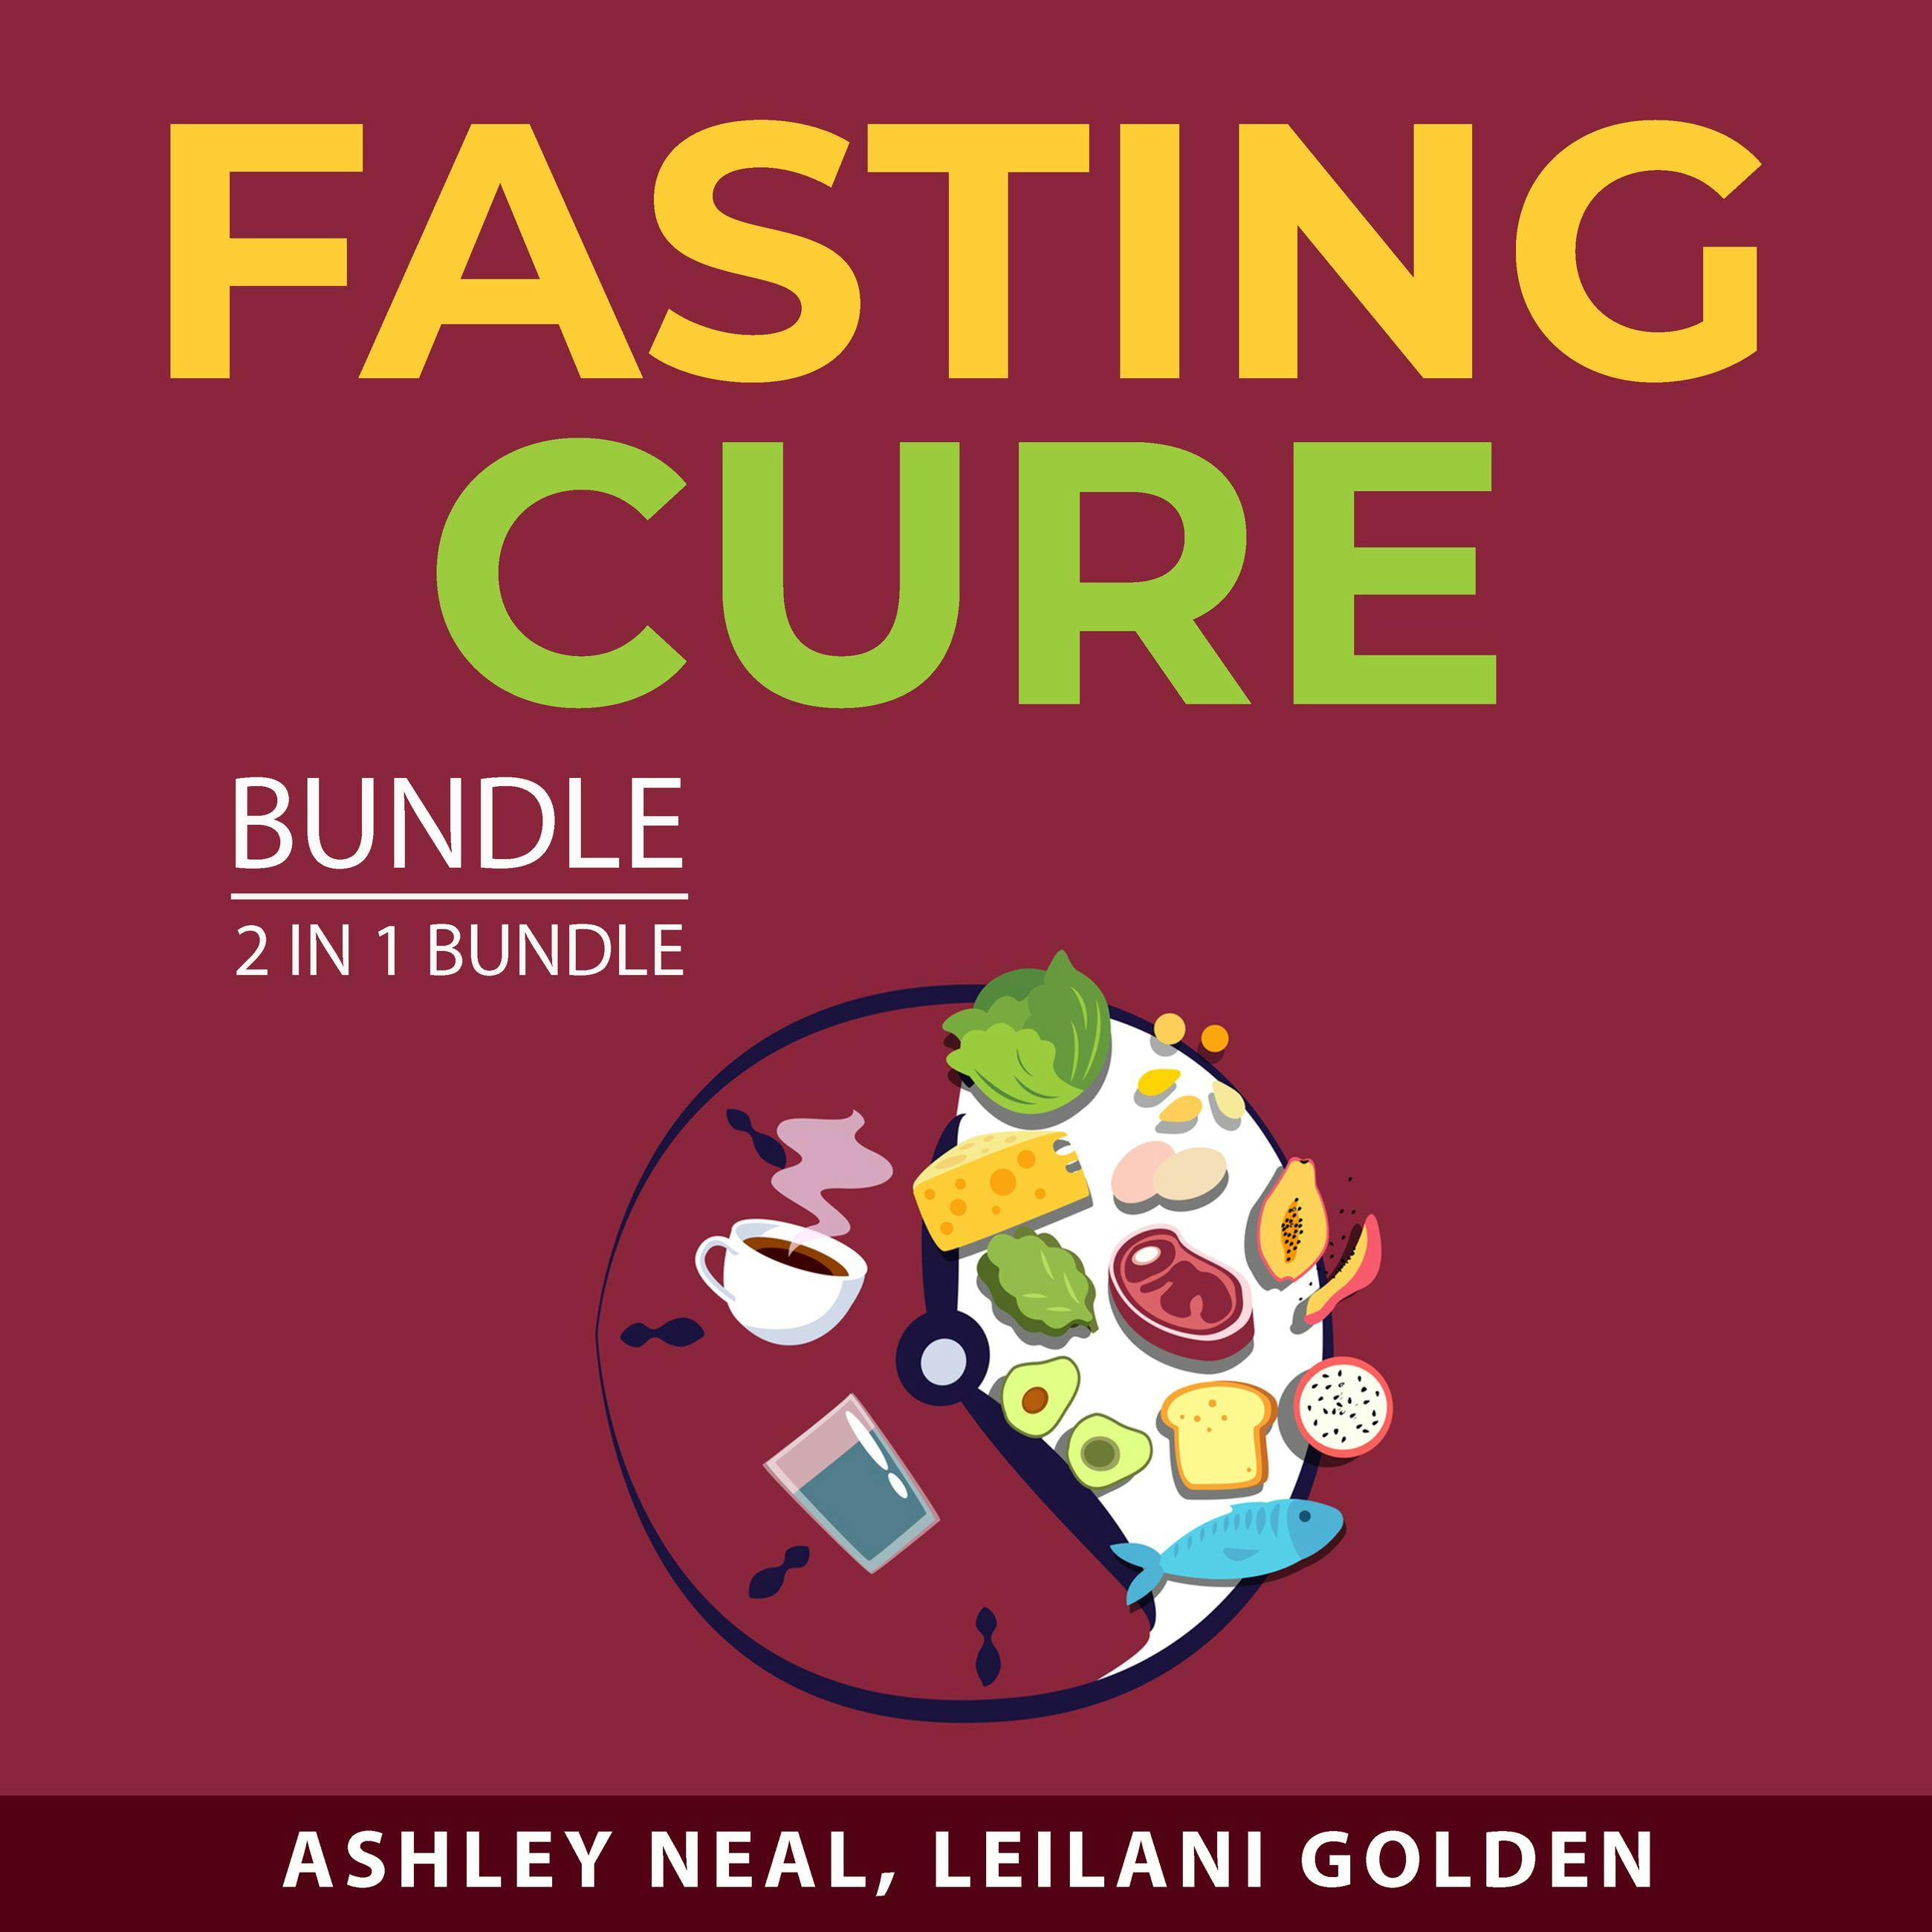 Fasting Cure Bundle, 2 in 1 Bundle: Everything About Intermittent Fasting and Fasting Diet For Weight Loss - undefined